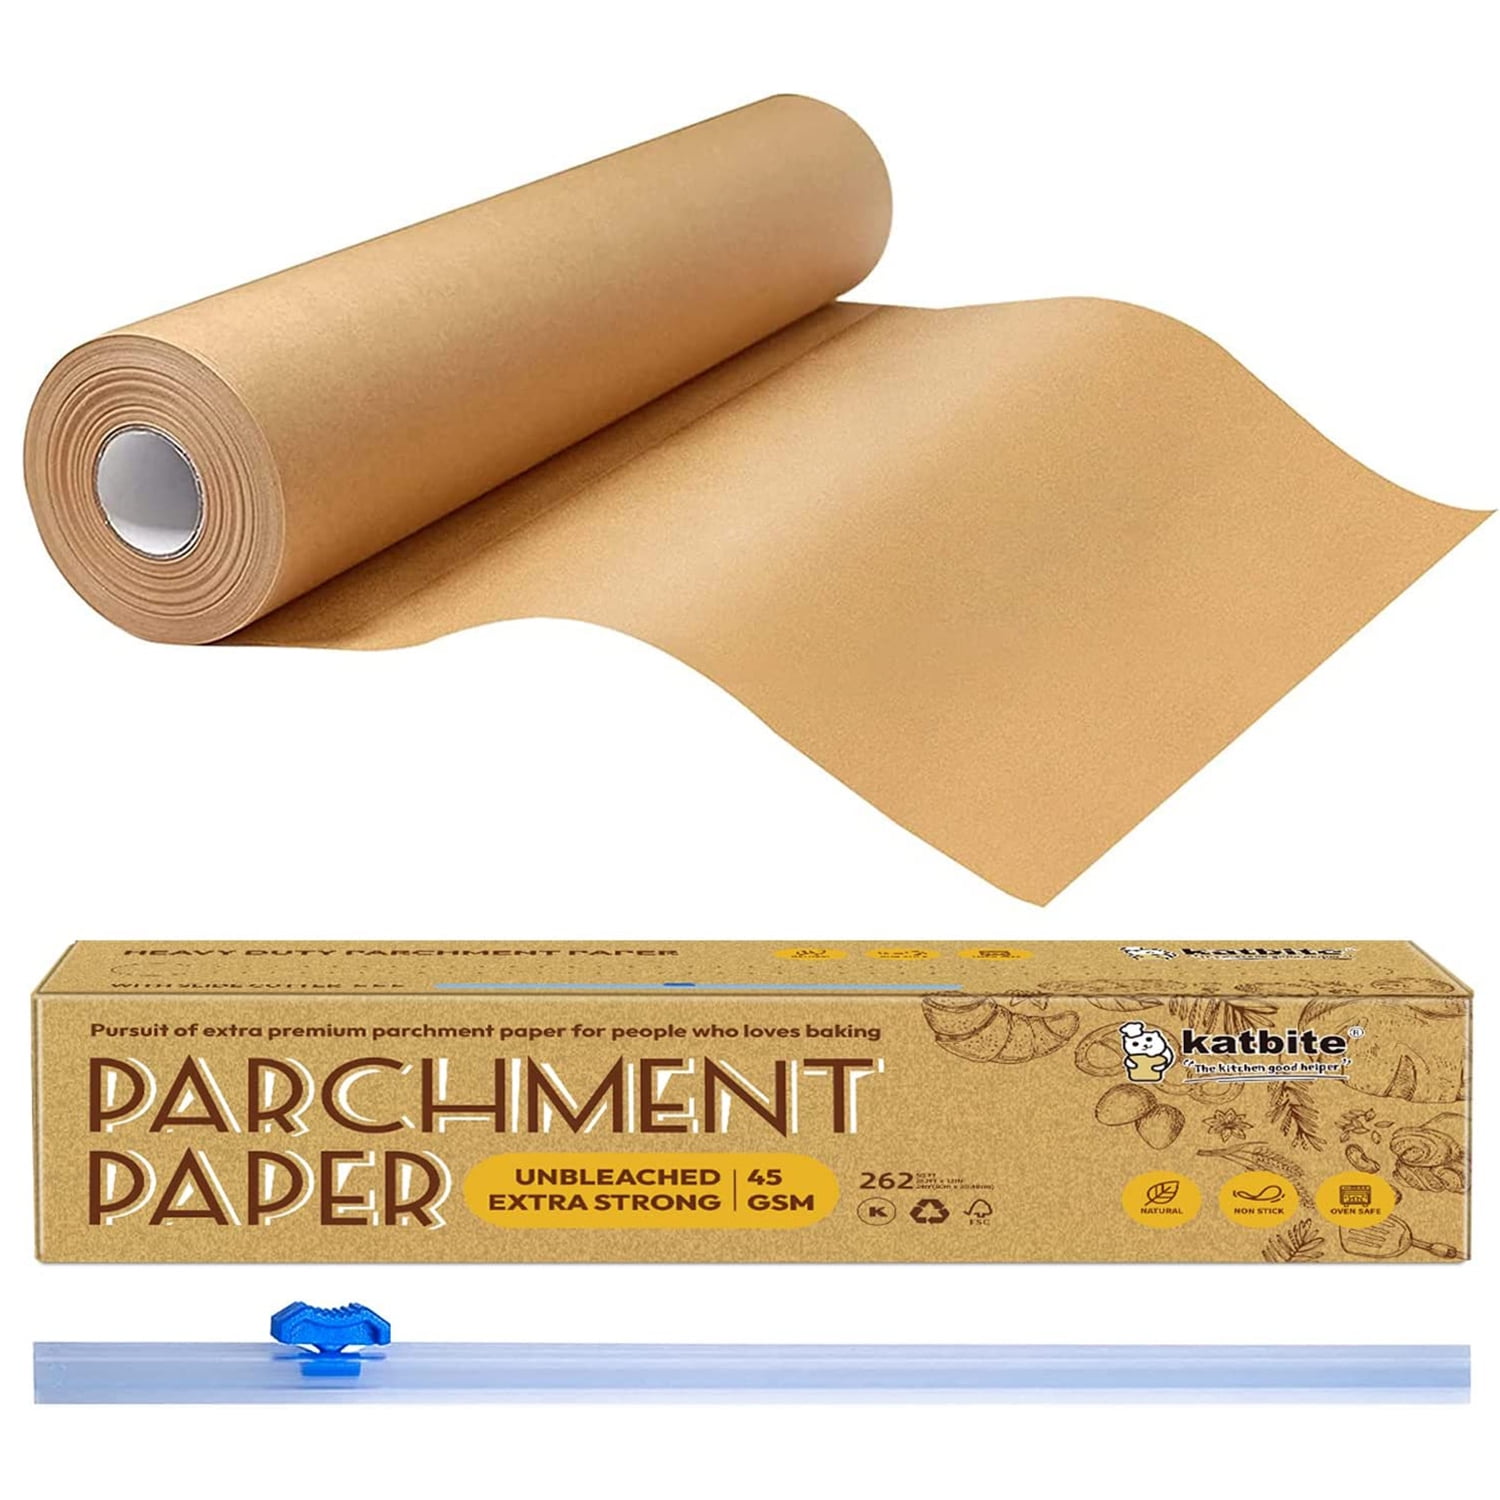 Uses for Parchment paper - 30 Creative Ideas for this Handy KItchen Tool